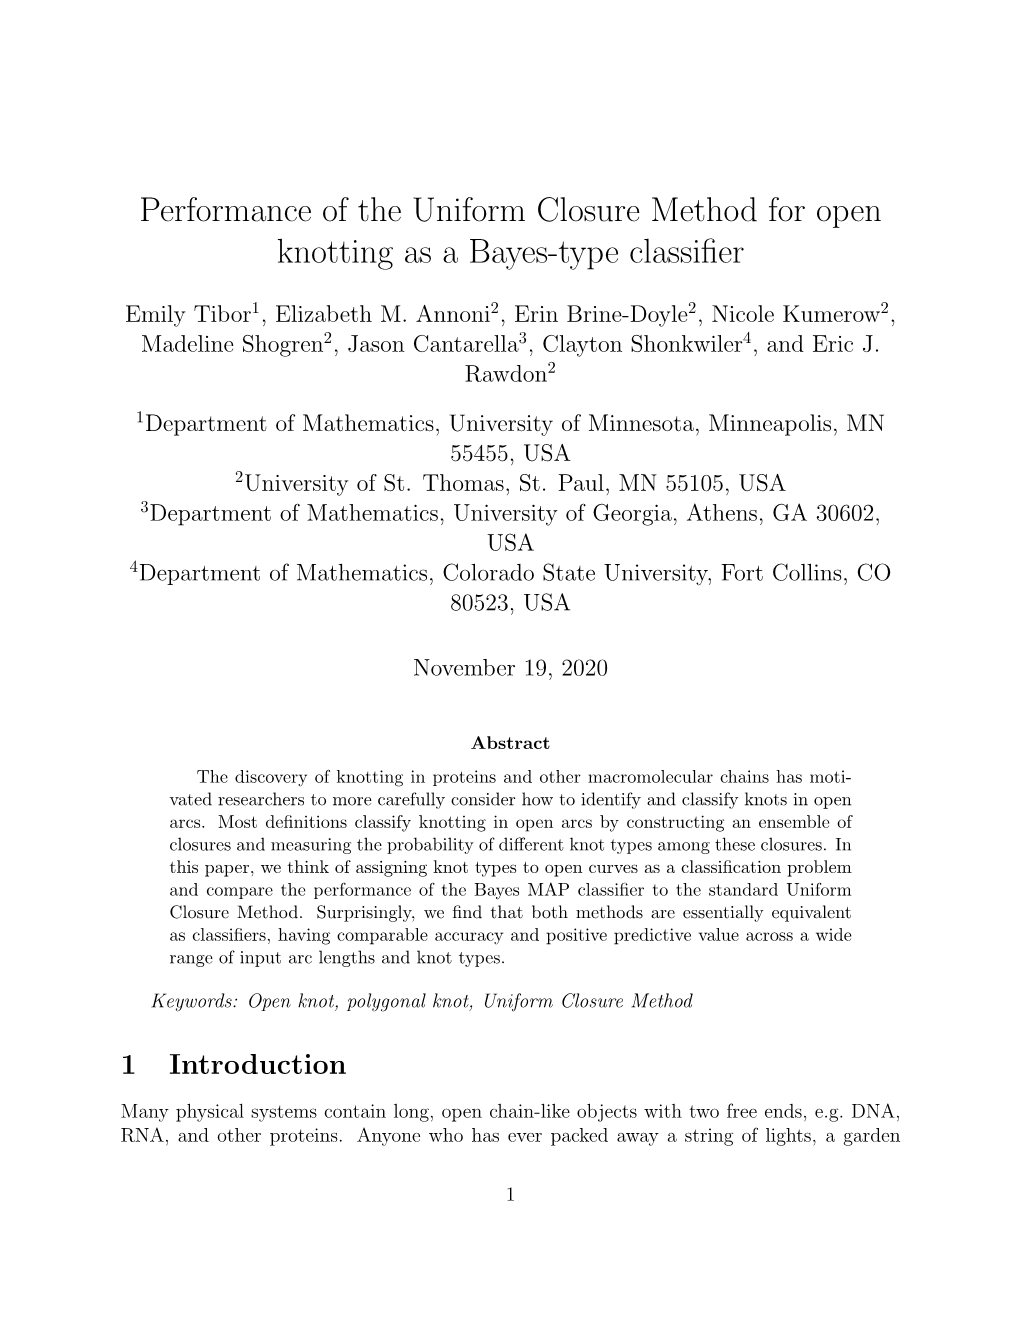 Performance of the Uniform Closure Method for Open Knotting As a Bayes-Type Classiﬁer